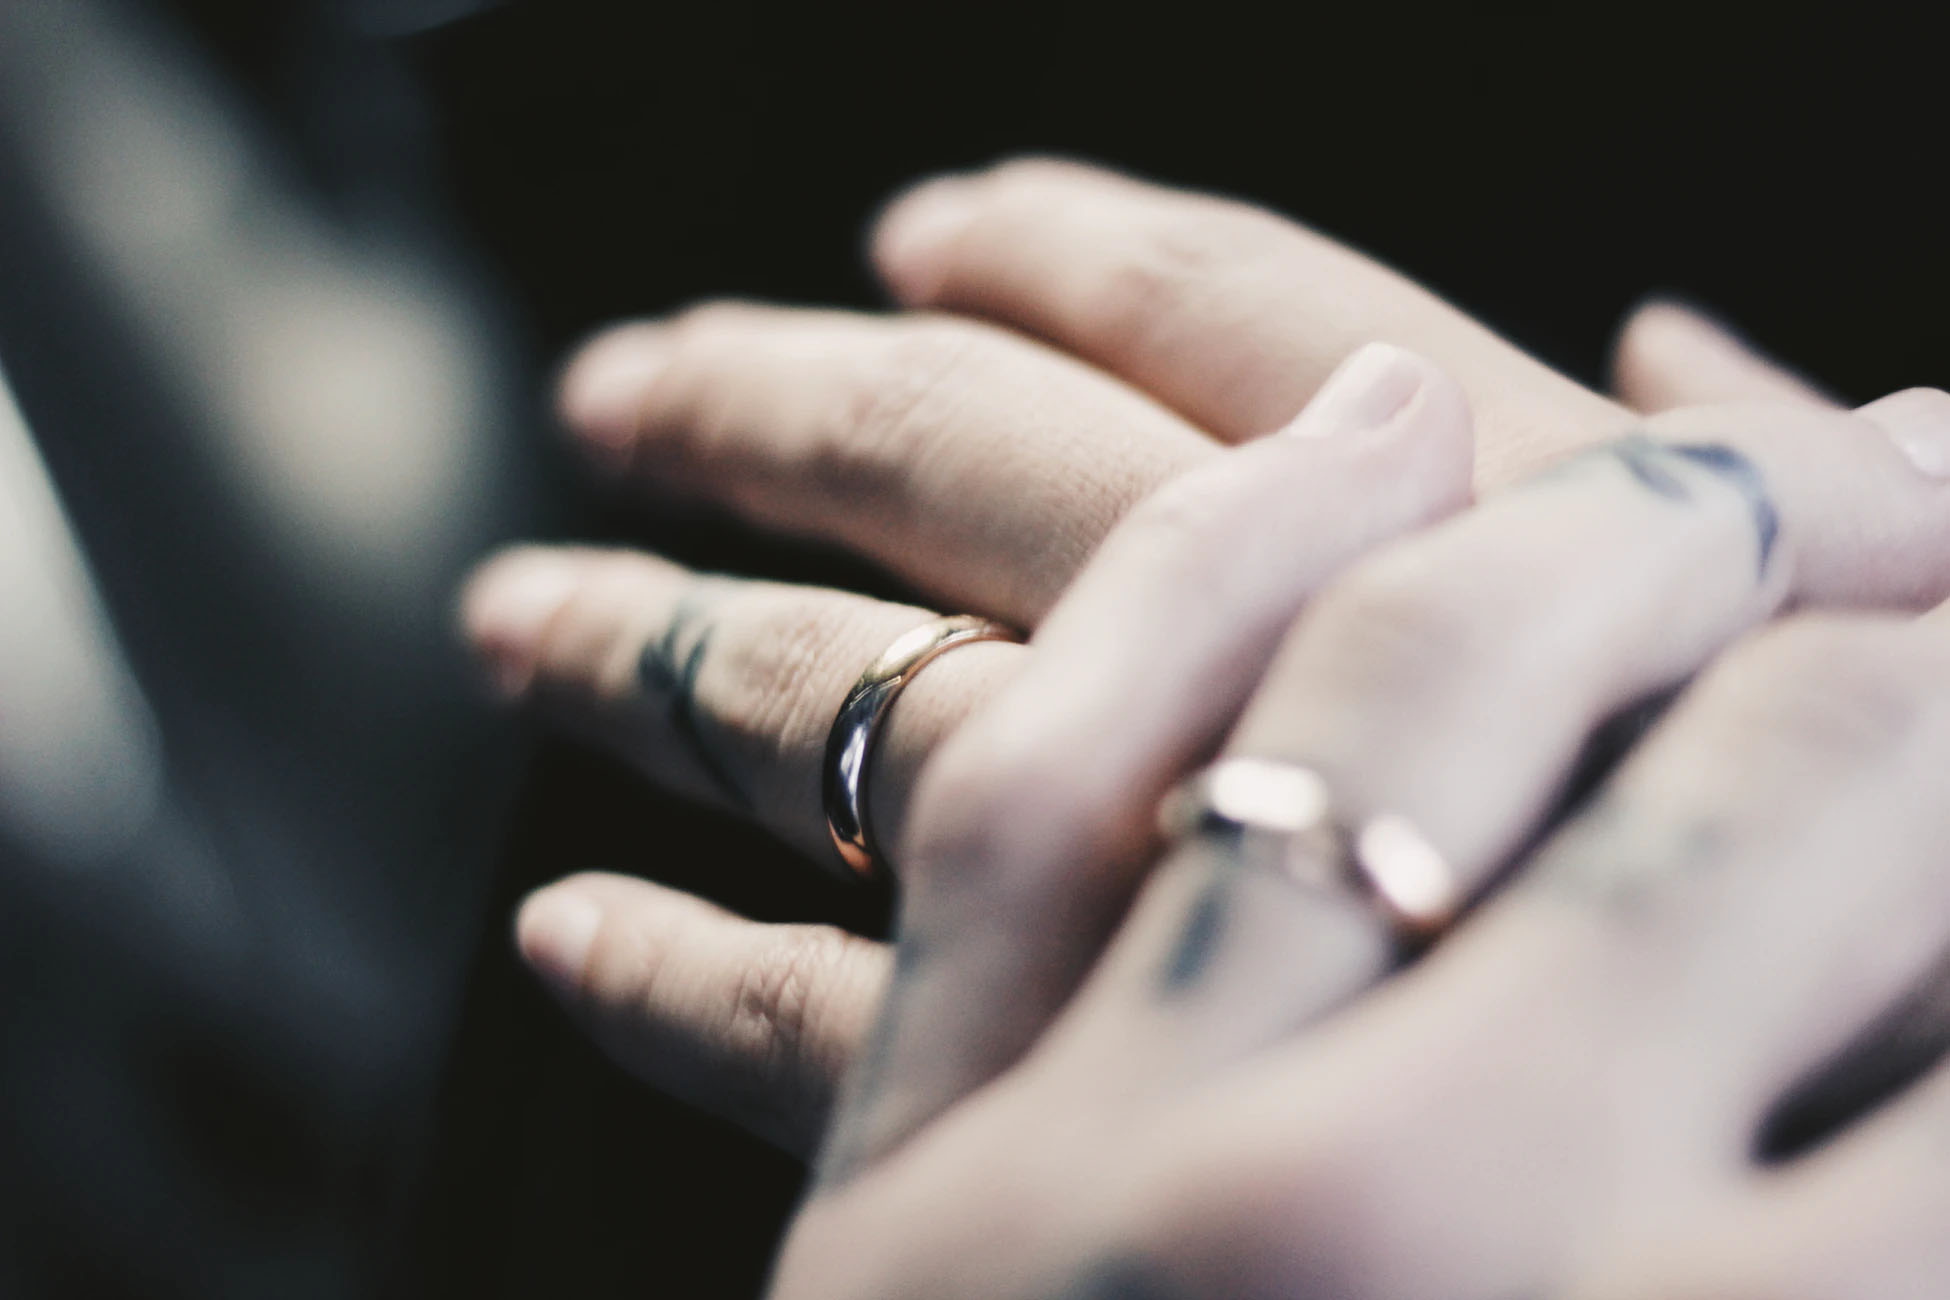 Couple with wedding rings touching hands